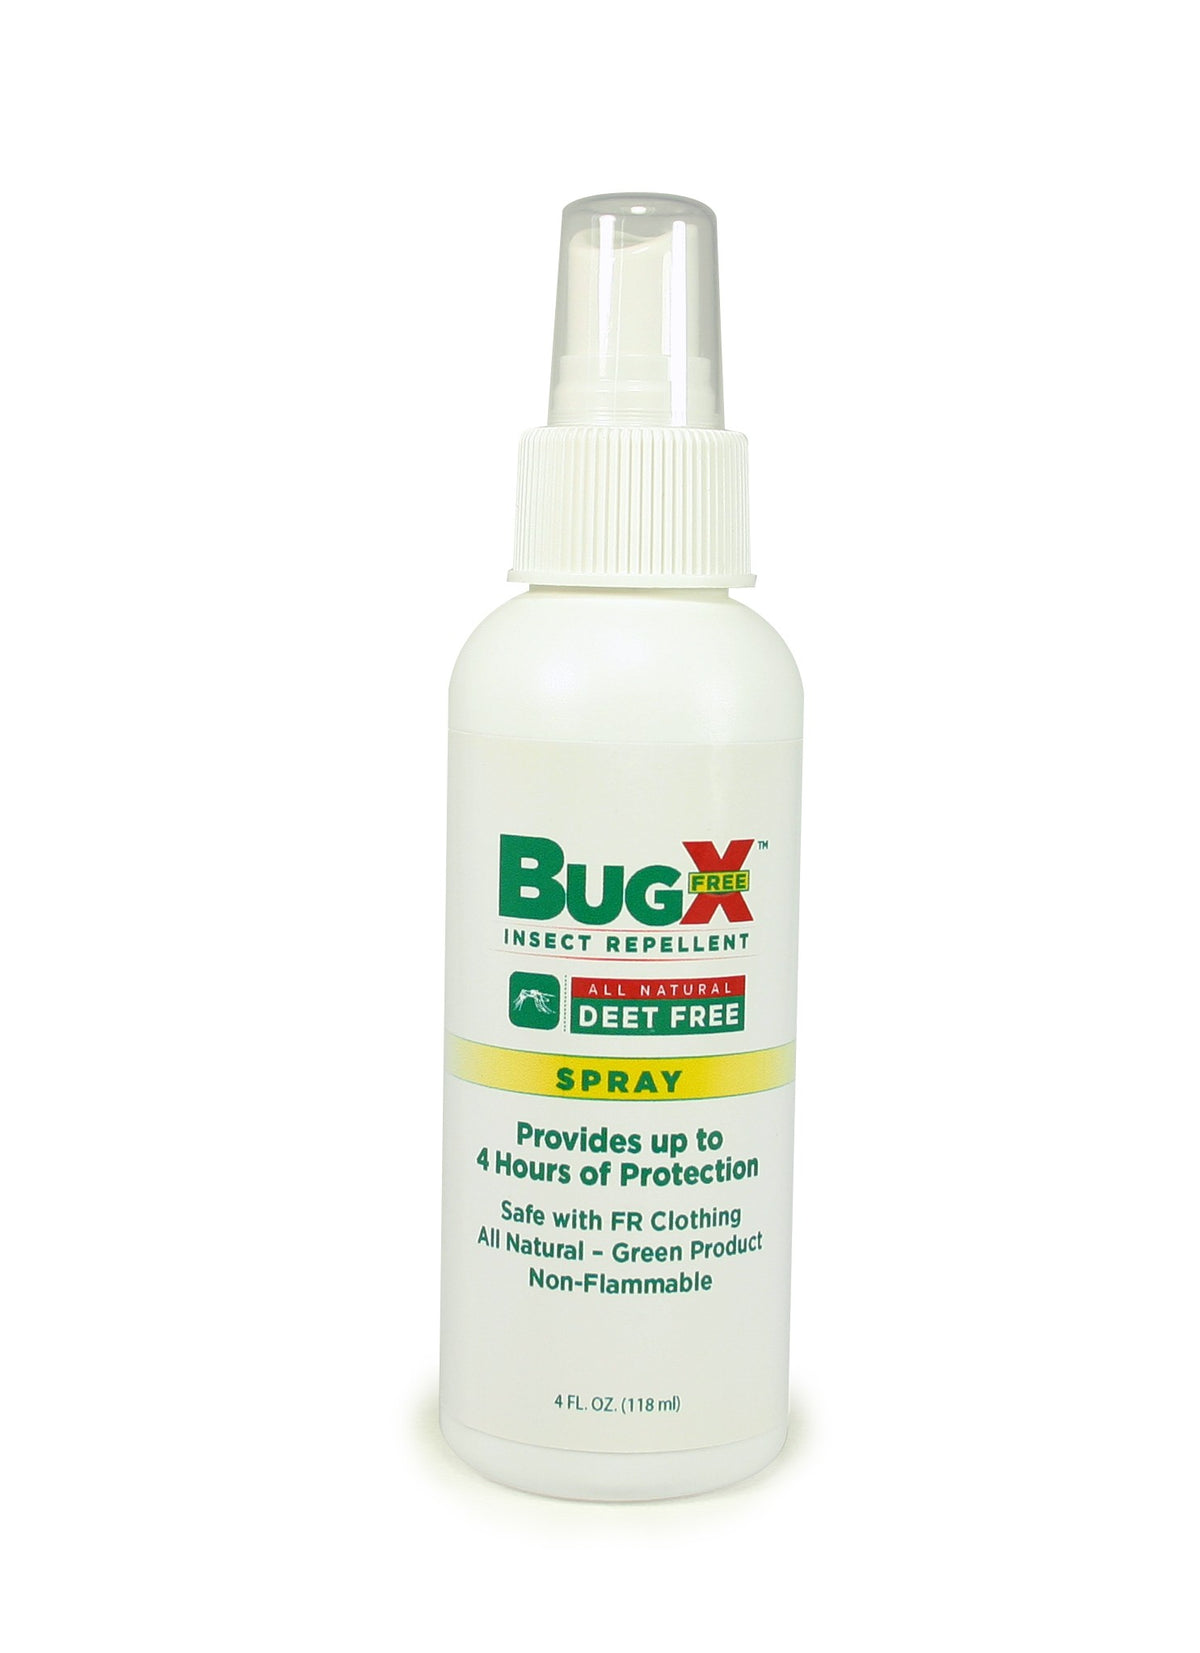 BugX DEET FREE Insect Repellent Spray, 4 Oz. Bottle, Case Of 12 - W-500-18-804